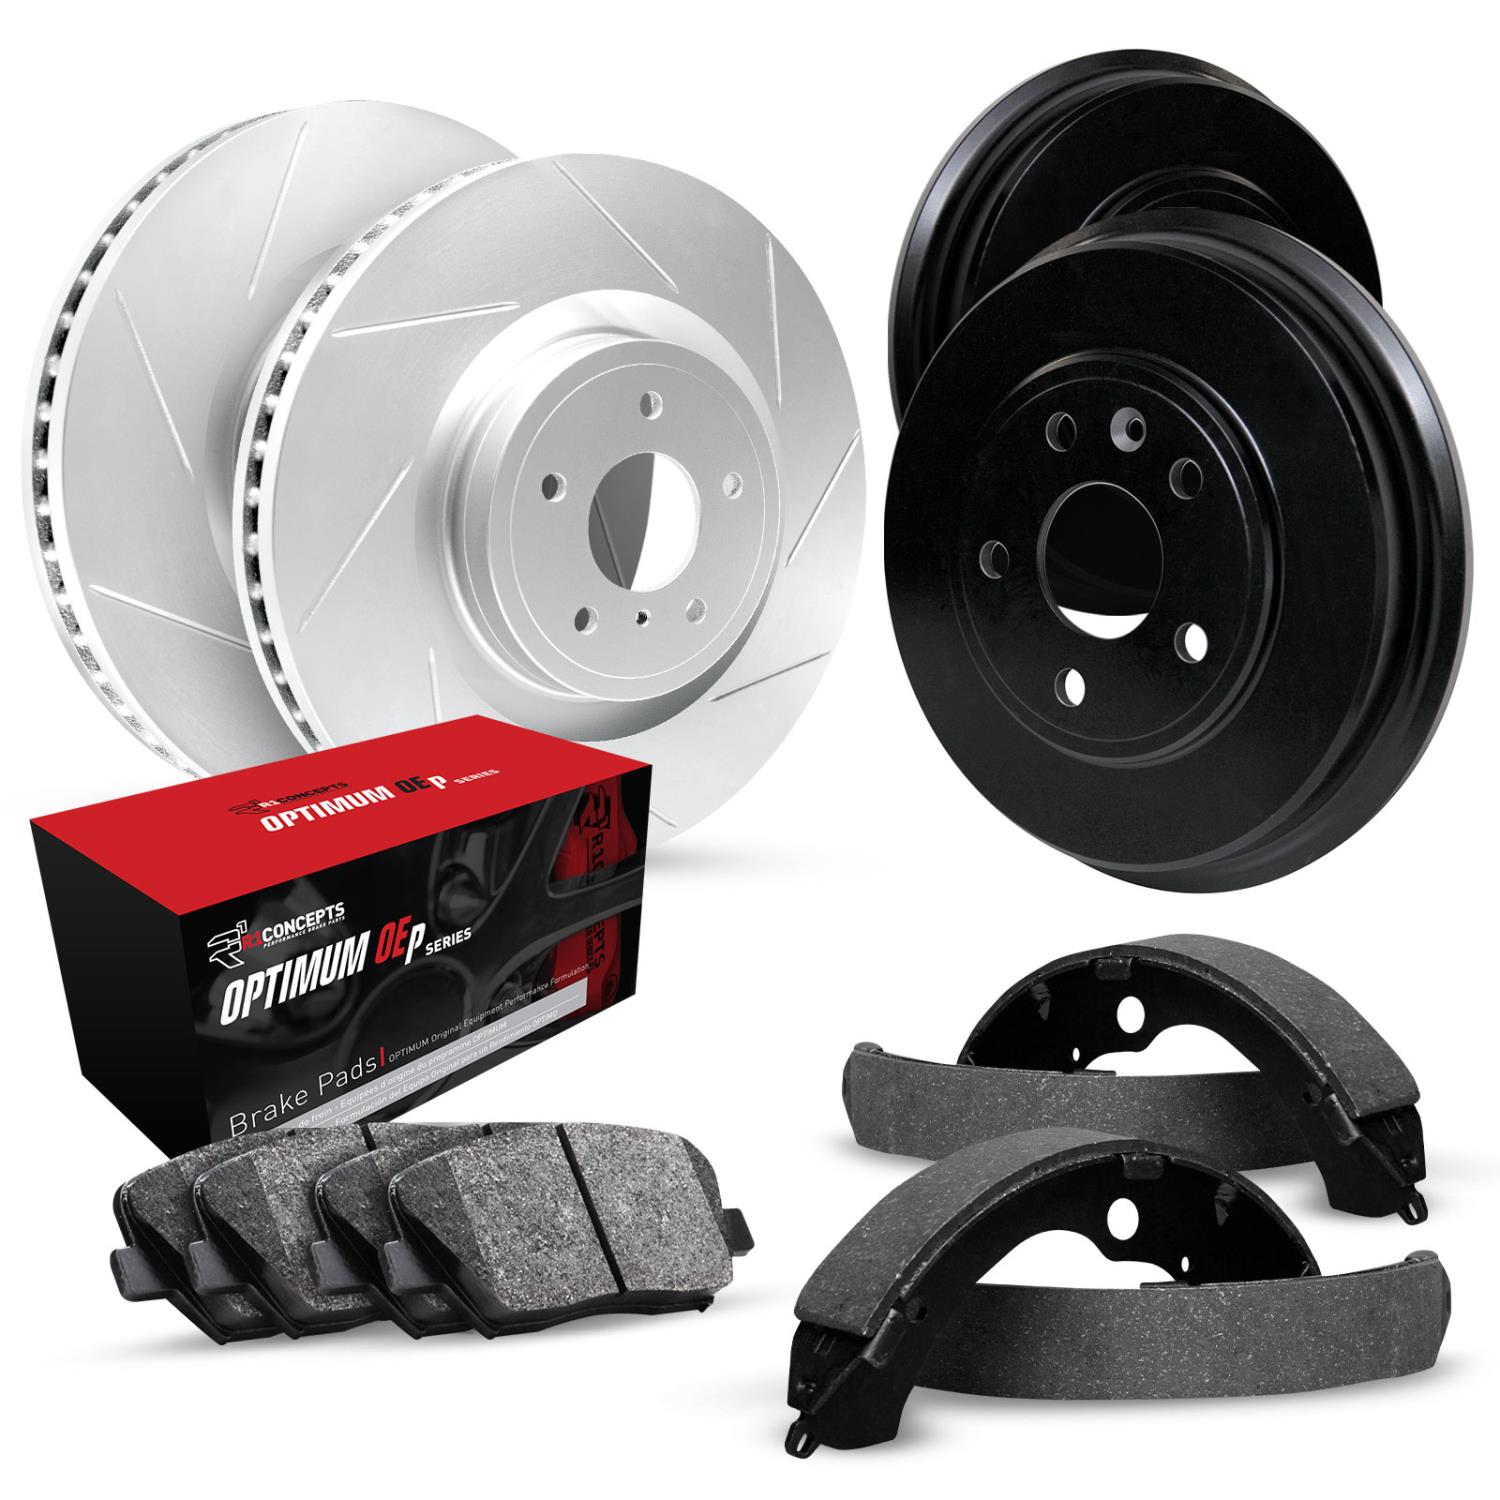 GEO-Carbon Slotted Brake Rotor & Drum Set w/Optimum OE Pads & Shoes, 1995-2003 Ford/Lincoln/Mercury/Mazda